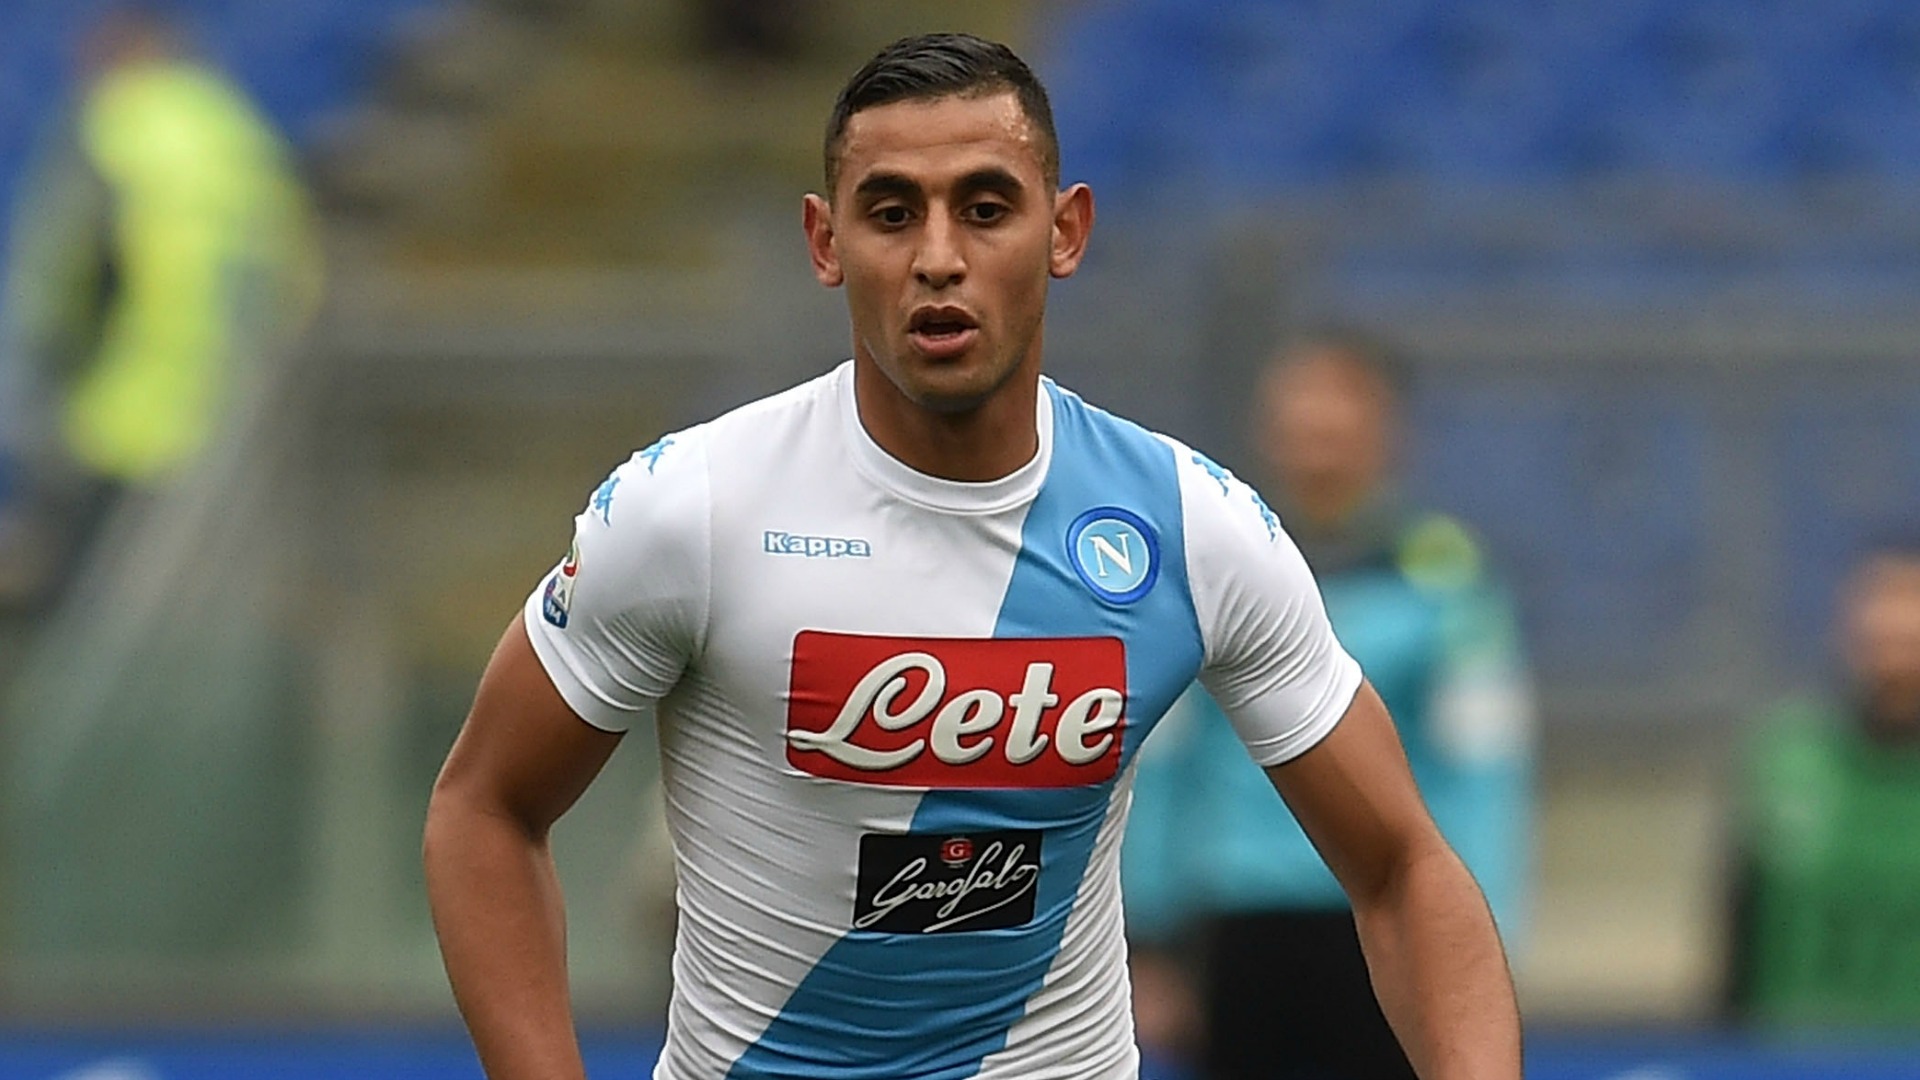 LIVERPOOL DON'T WANT GHOULAM Faouzi-ghoulam-napoli_h9z9h84pjzbh110bxm8gucisd